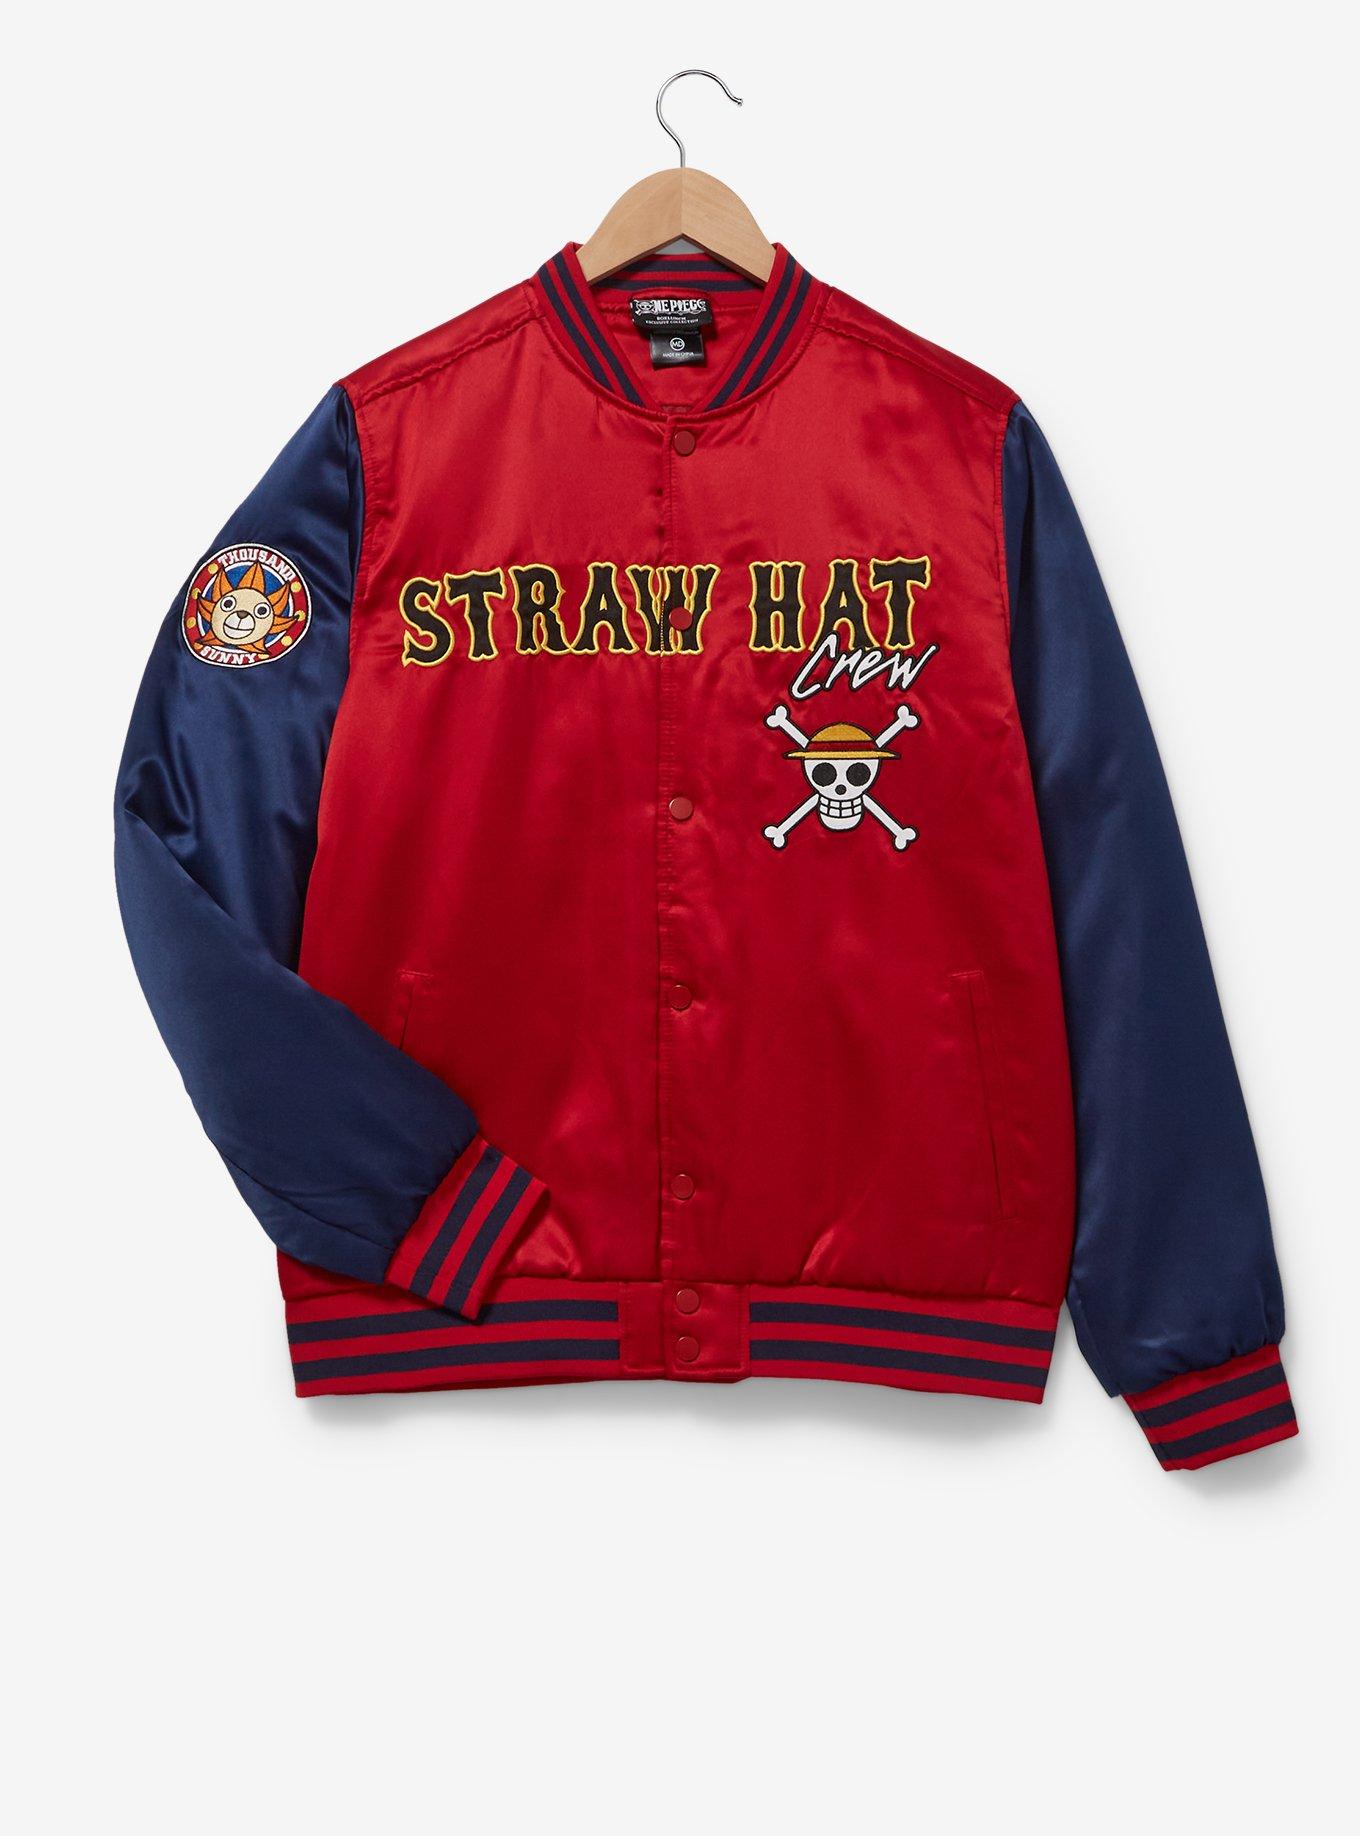 One Piece Straw Hat Crew Bomber Jacket - BoxLunch Exclusive